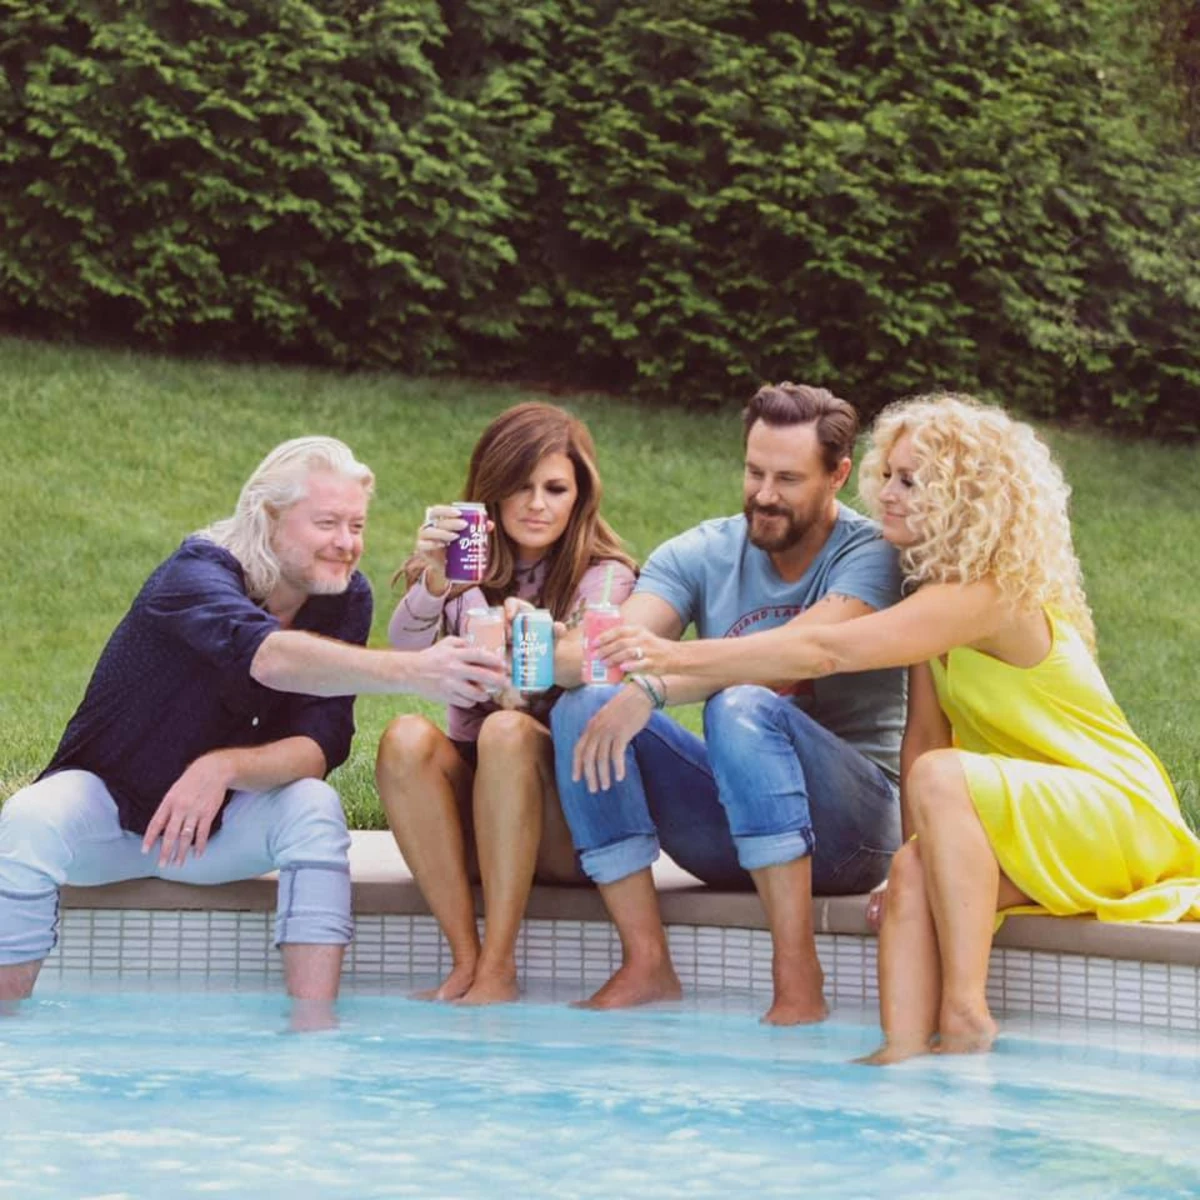 See Where To Get Little Big Town's "Day Drinking Wine" In Albany